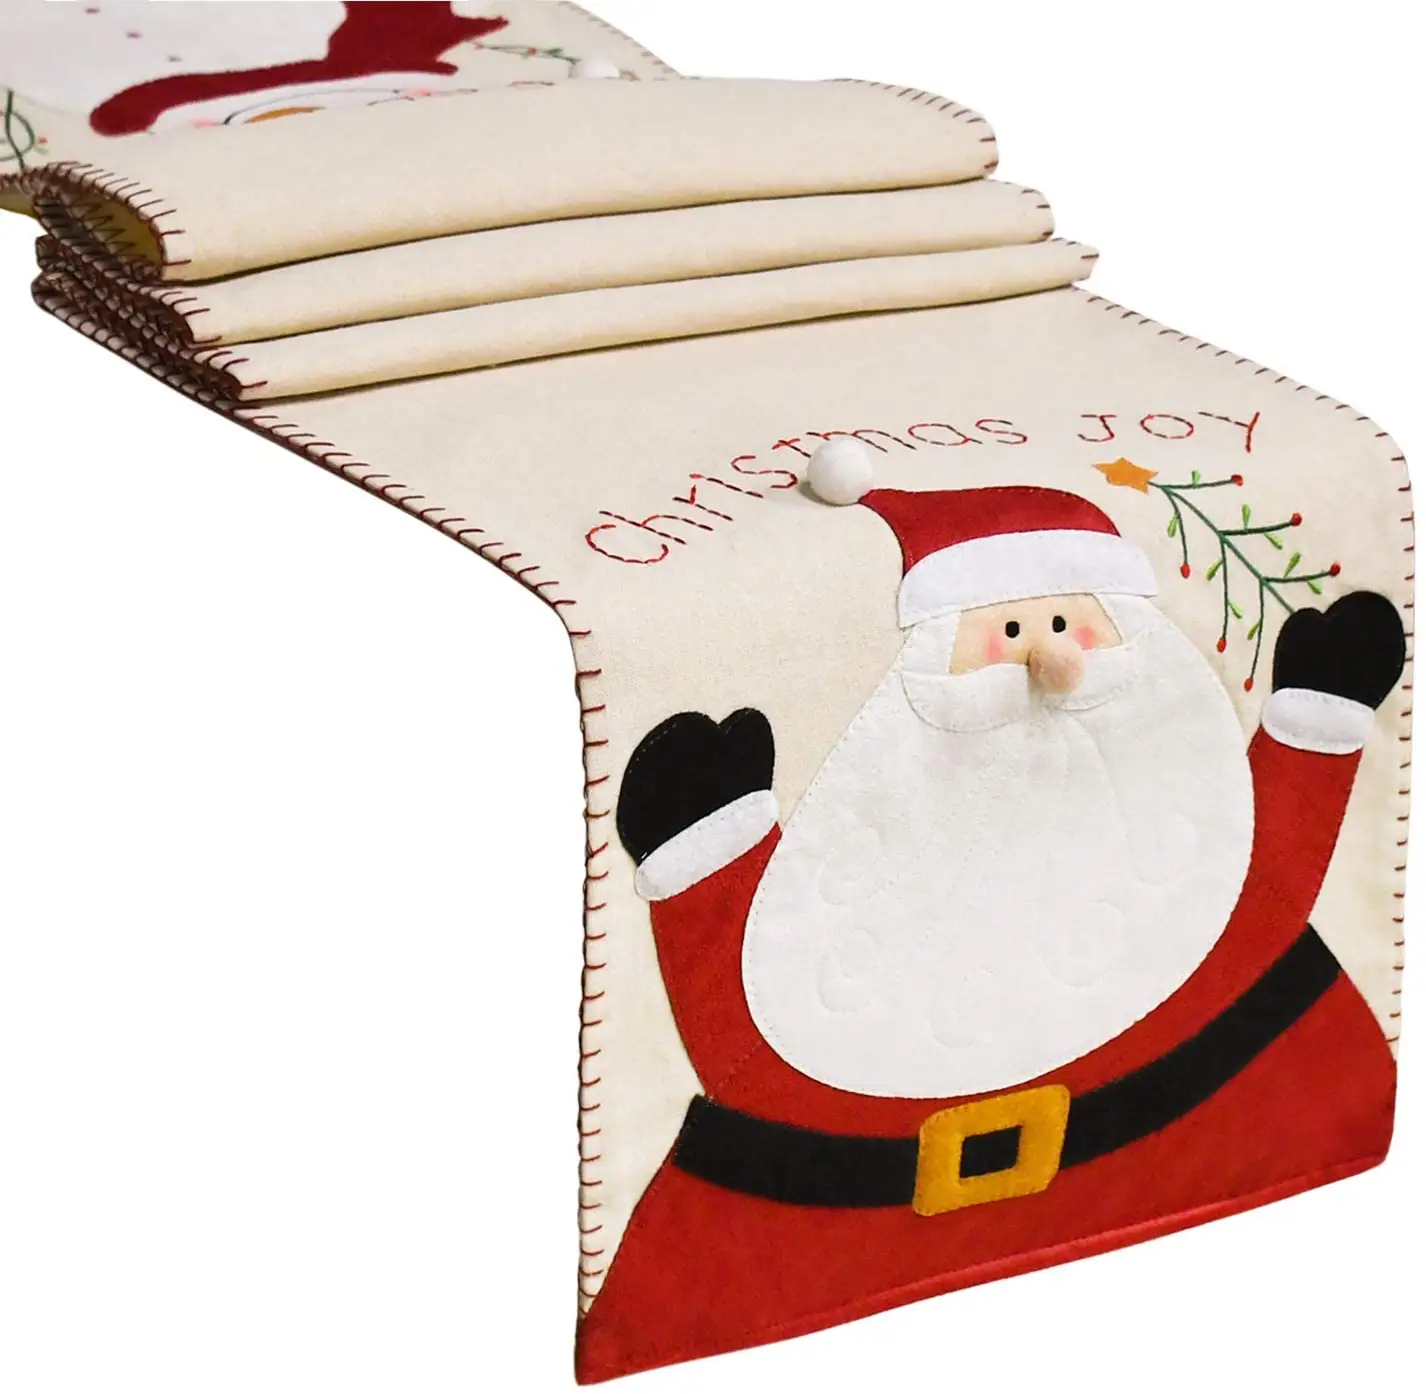 Christmas Table Runner with Santa Snowman Pattern, Embroidered Christmas Joy, Cotton Canvas Rustic Table Runner for Christmas